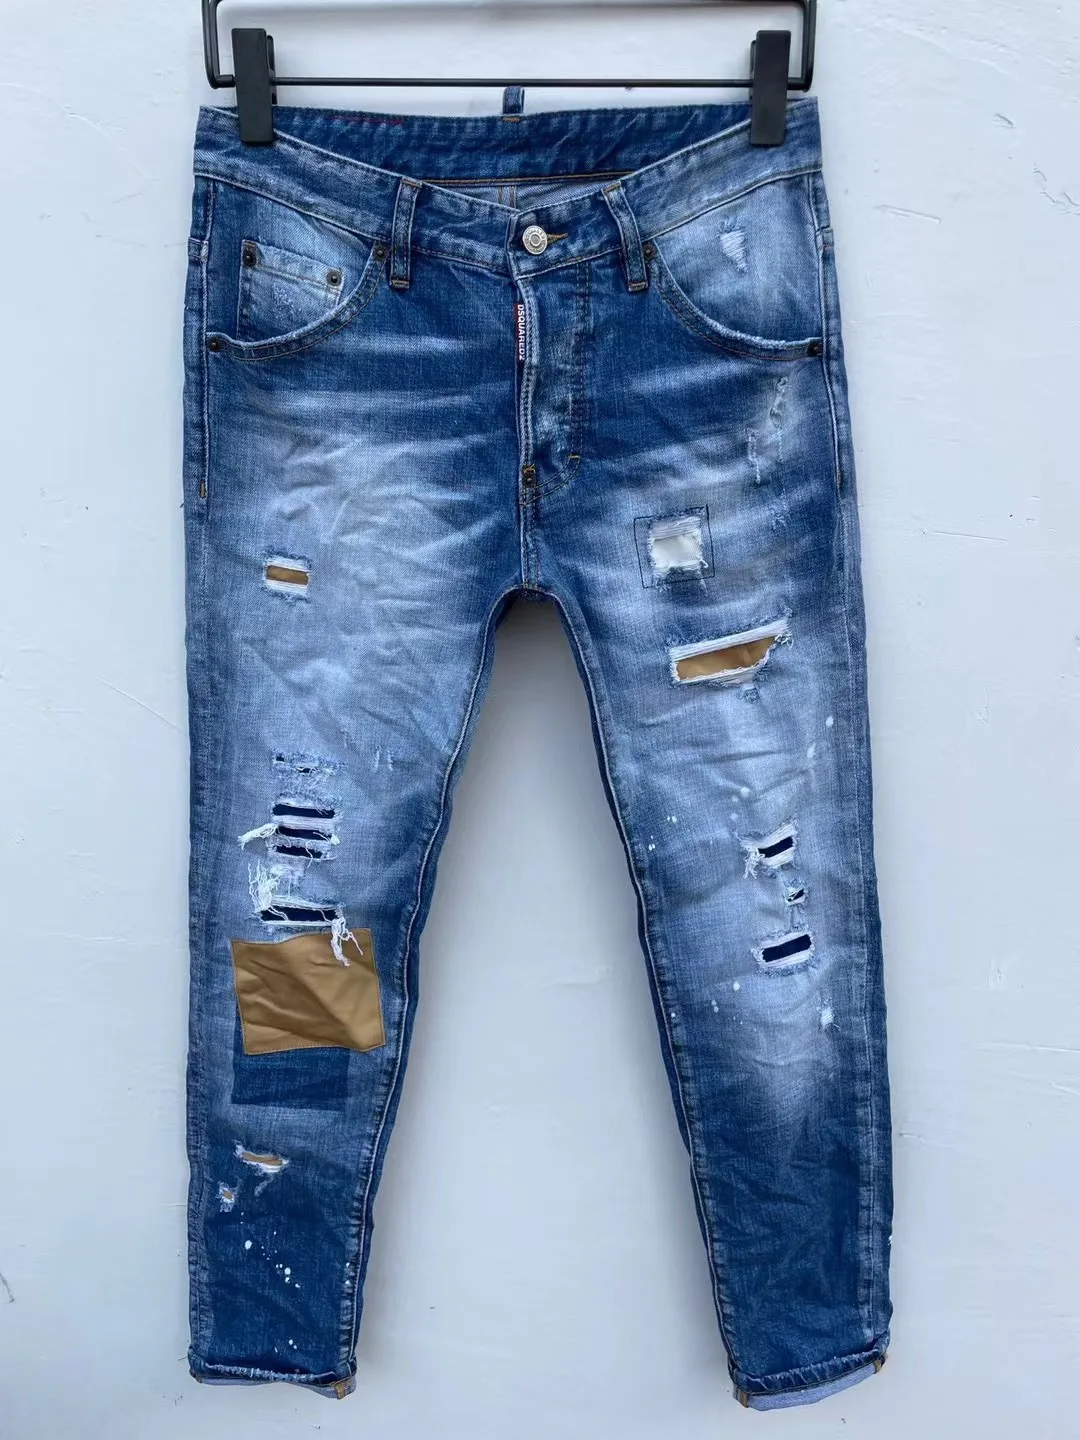 

Patch Cloth Dsquared2 Brand Summer Men's Long Jeans Fashion Casual Slim High Quality Print Ripped Denim Jean Streetwear